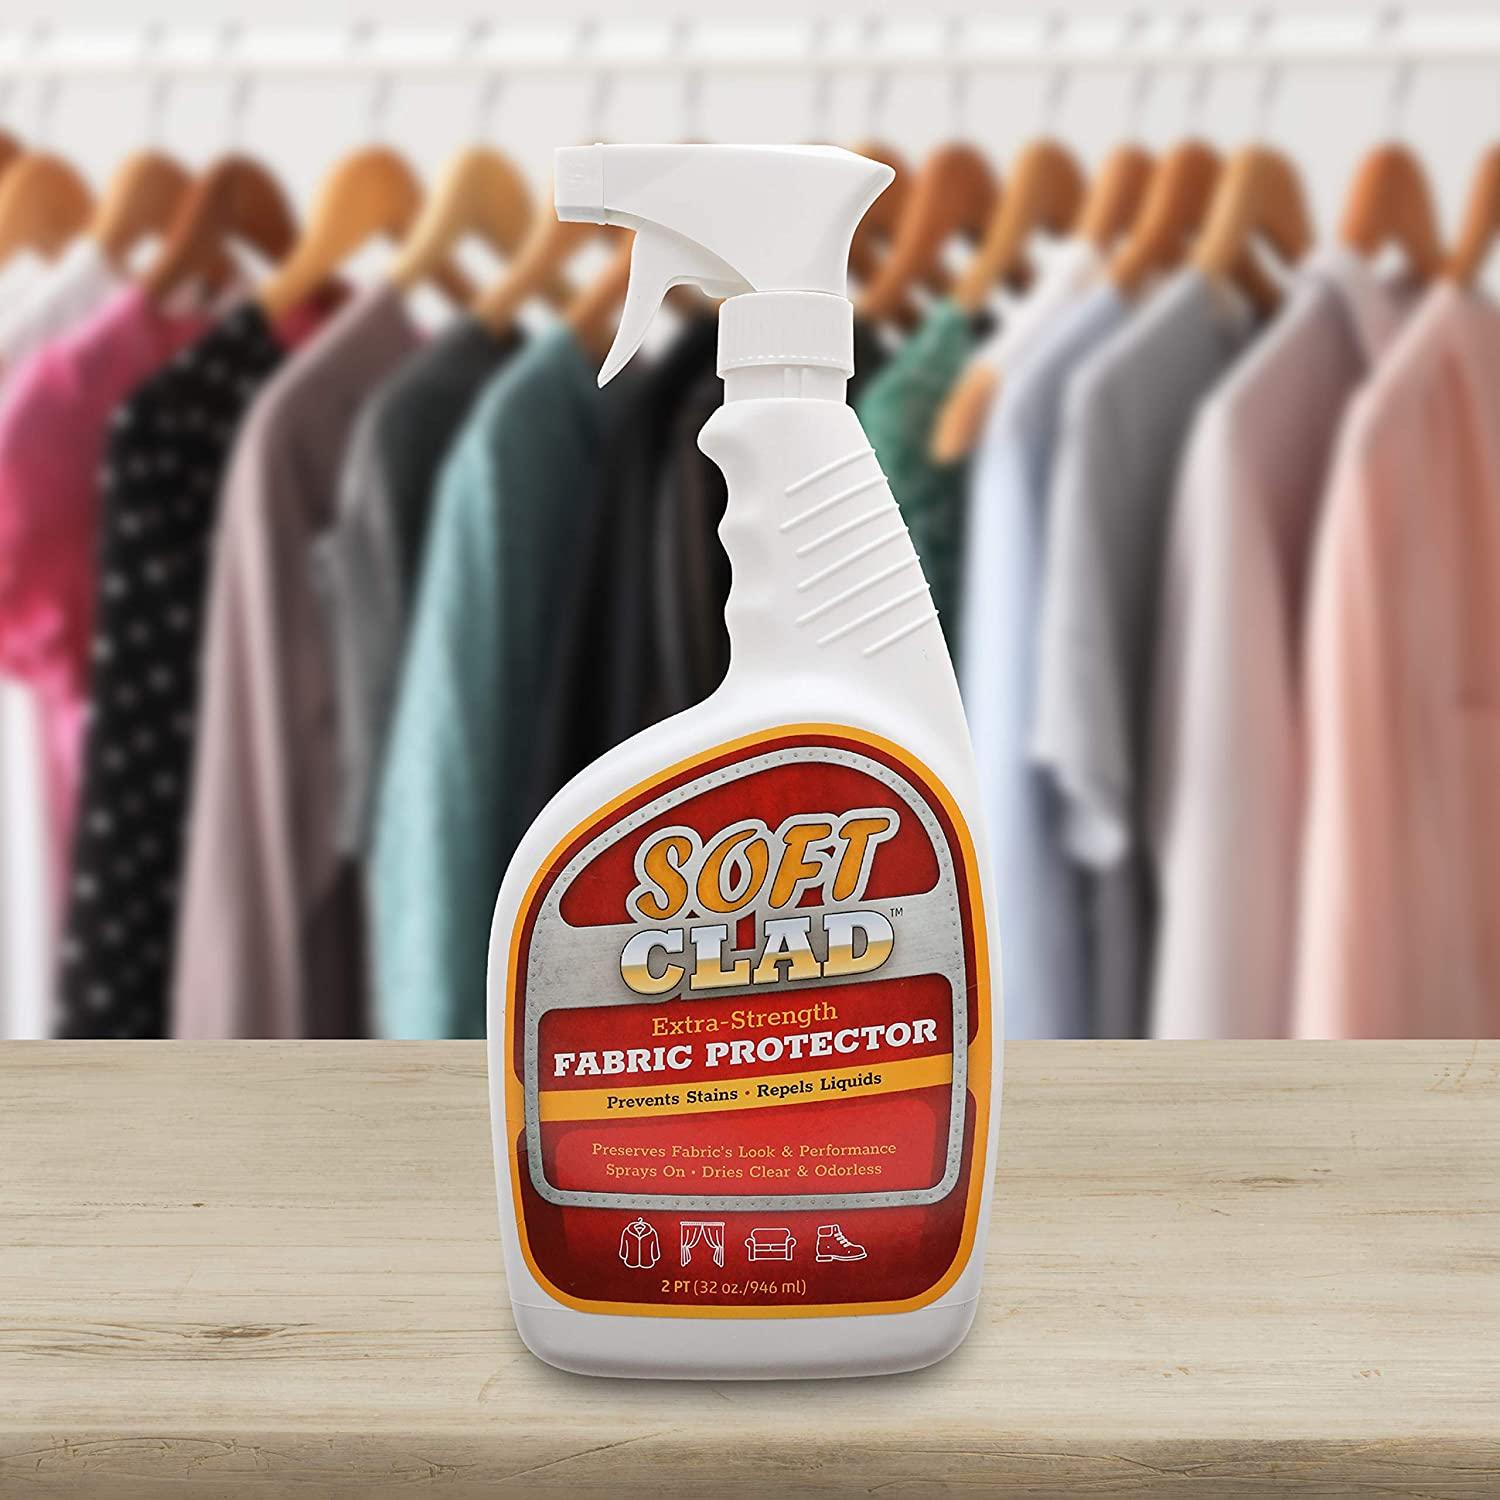 Extra Strength Fabric Protector Spray Prevents Stains and Repels Liquids. SoftClad Safely Guards Furniture Shoes Carpet Upholstery Suede Leather